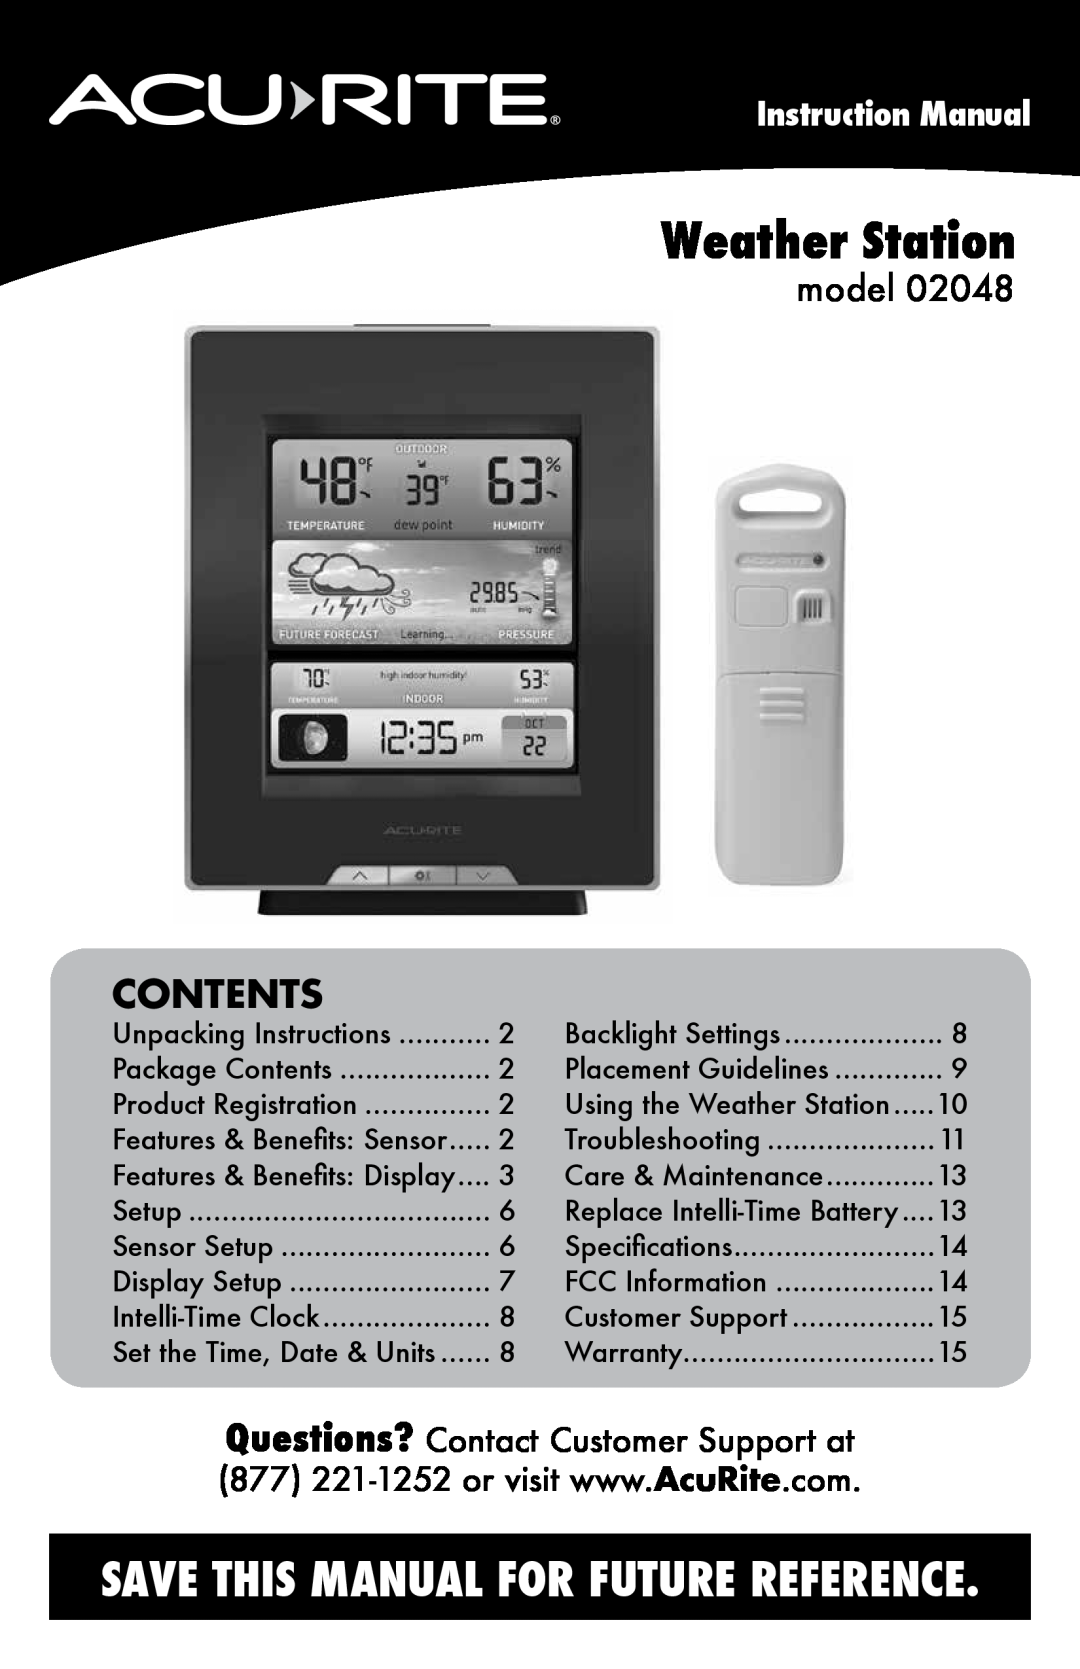 Acu-Rite 2048 instruction manual Contents, model, Weather Station, Save This Manual For Future Reference 